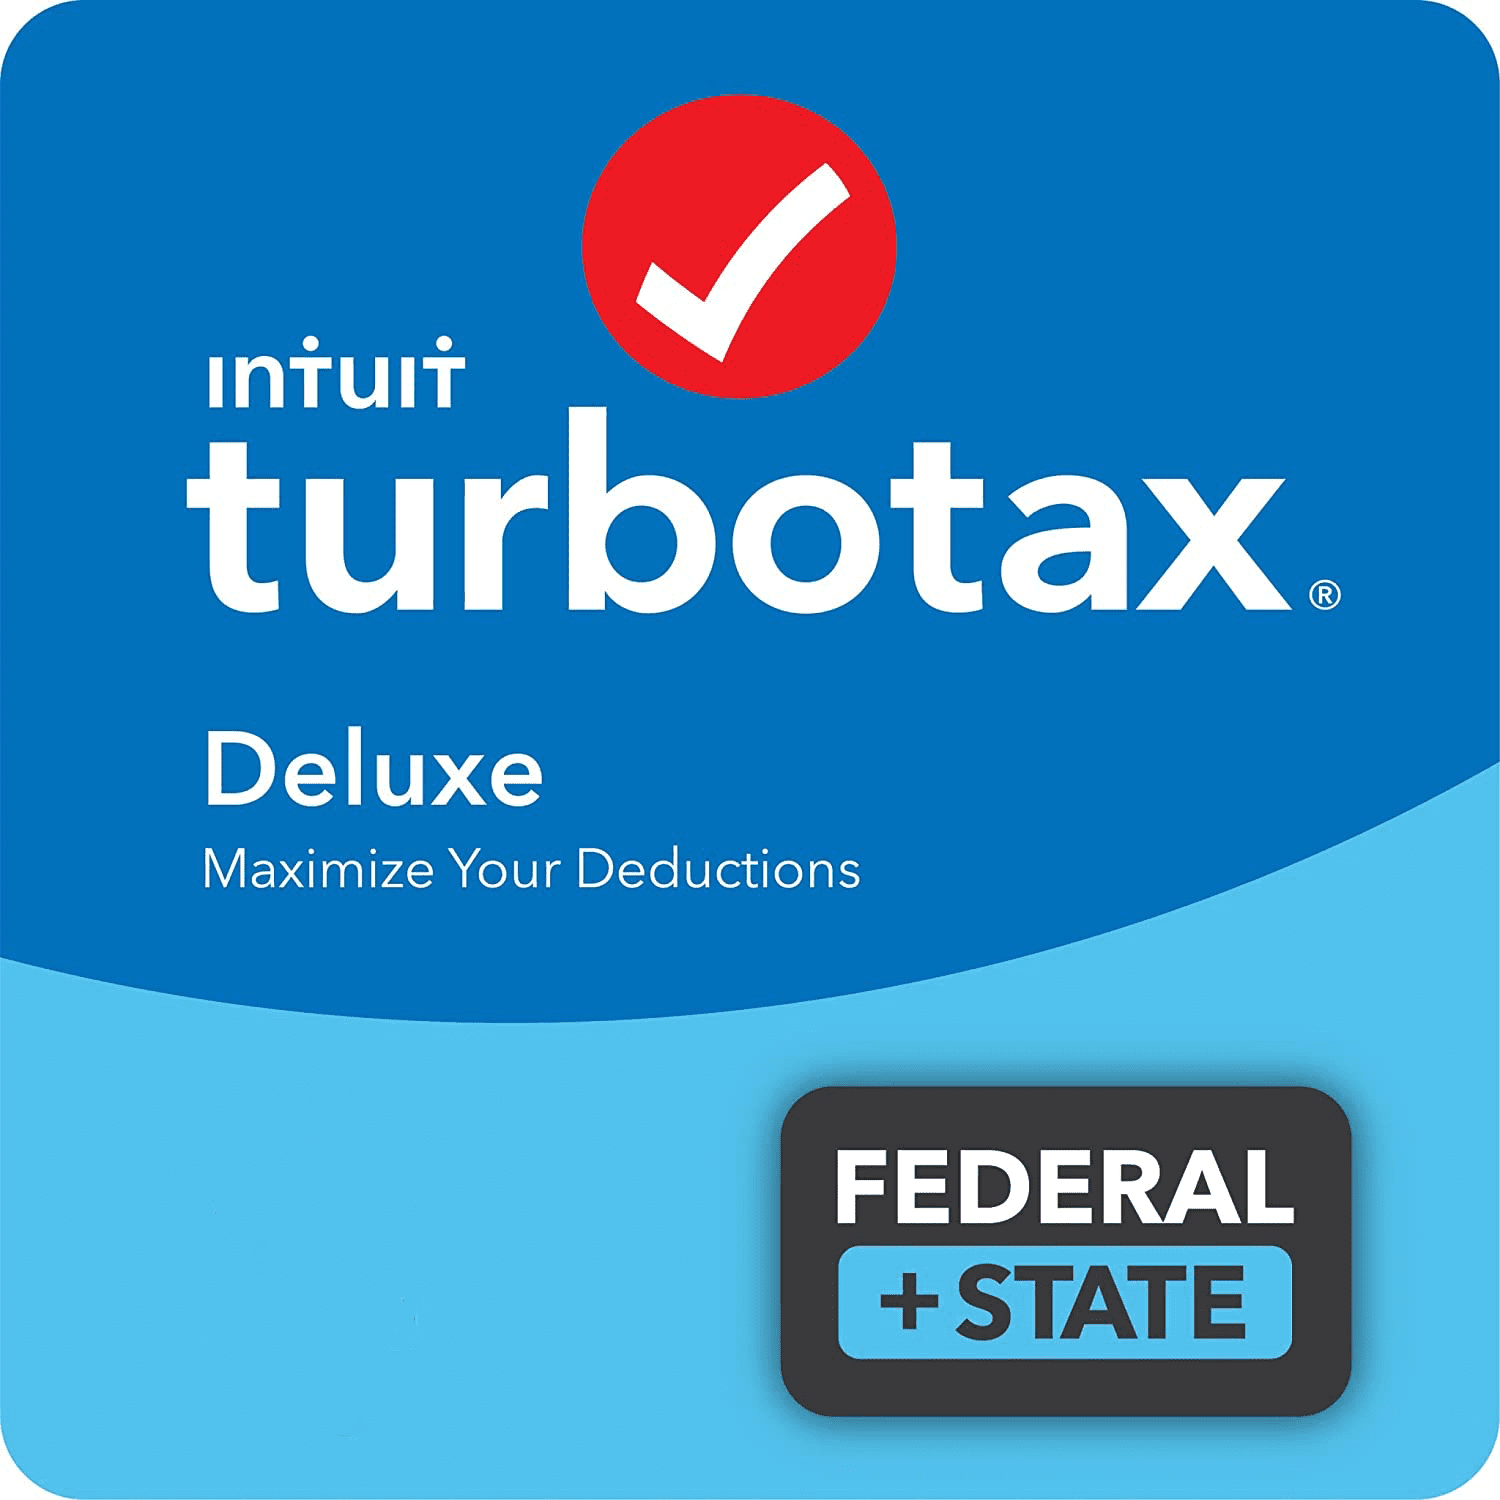 Intuit TurboTax Deluxe + State 2021 Tax Software, Federal and State Tax